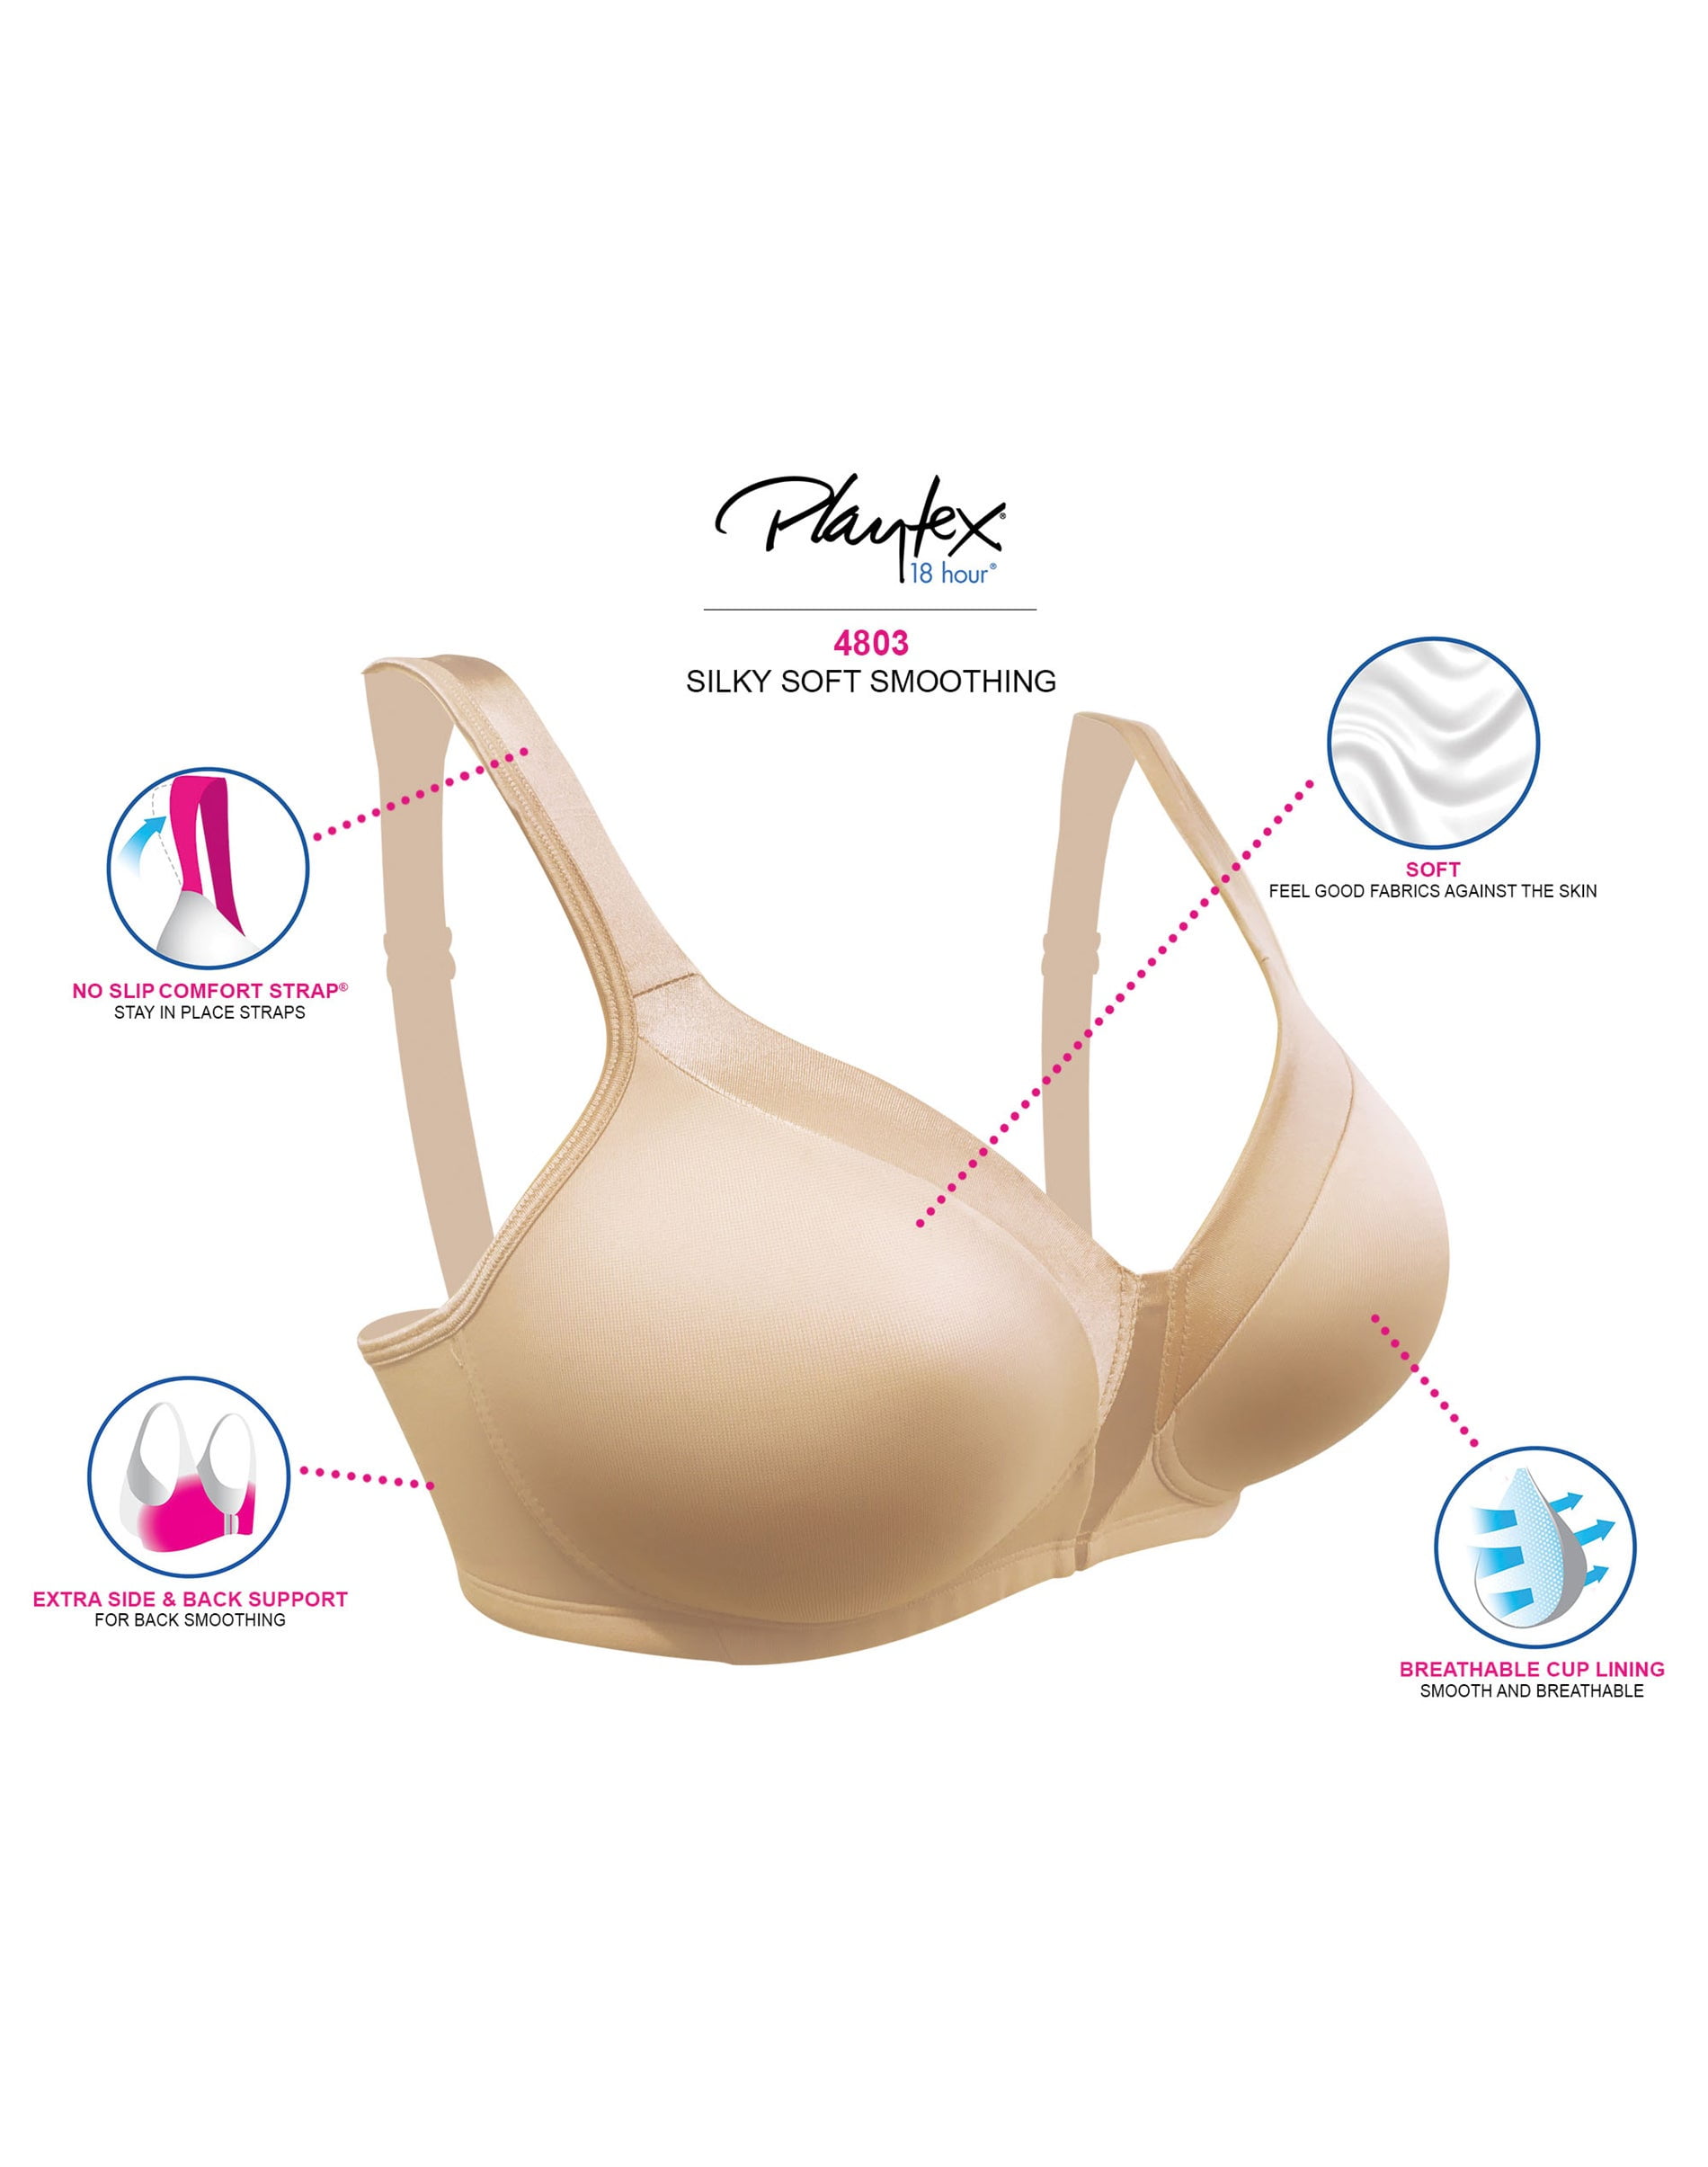 Playtex, Intimates & Sleepwear, Playtex Secrets Comfort Fit All Over  Smoothing Underwire Bra Nude 38d Nwt